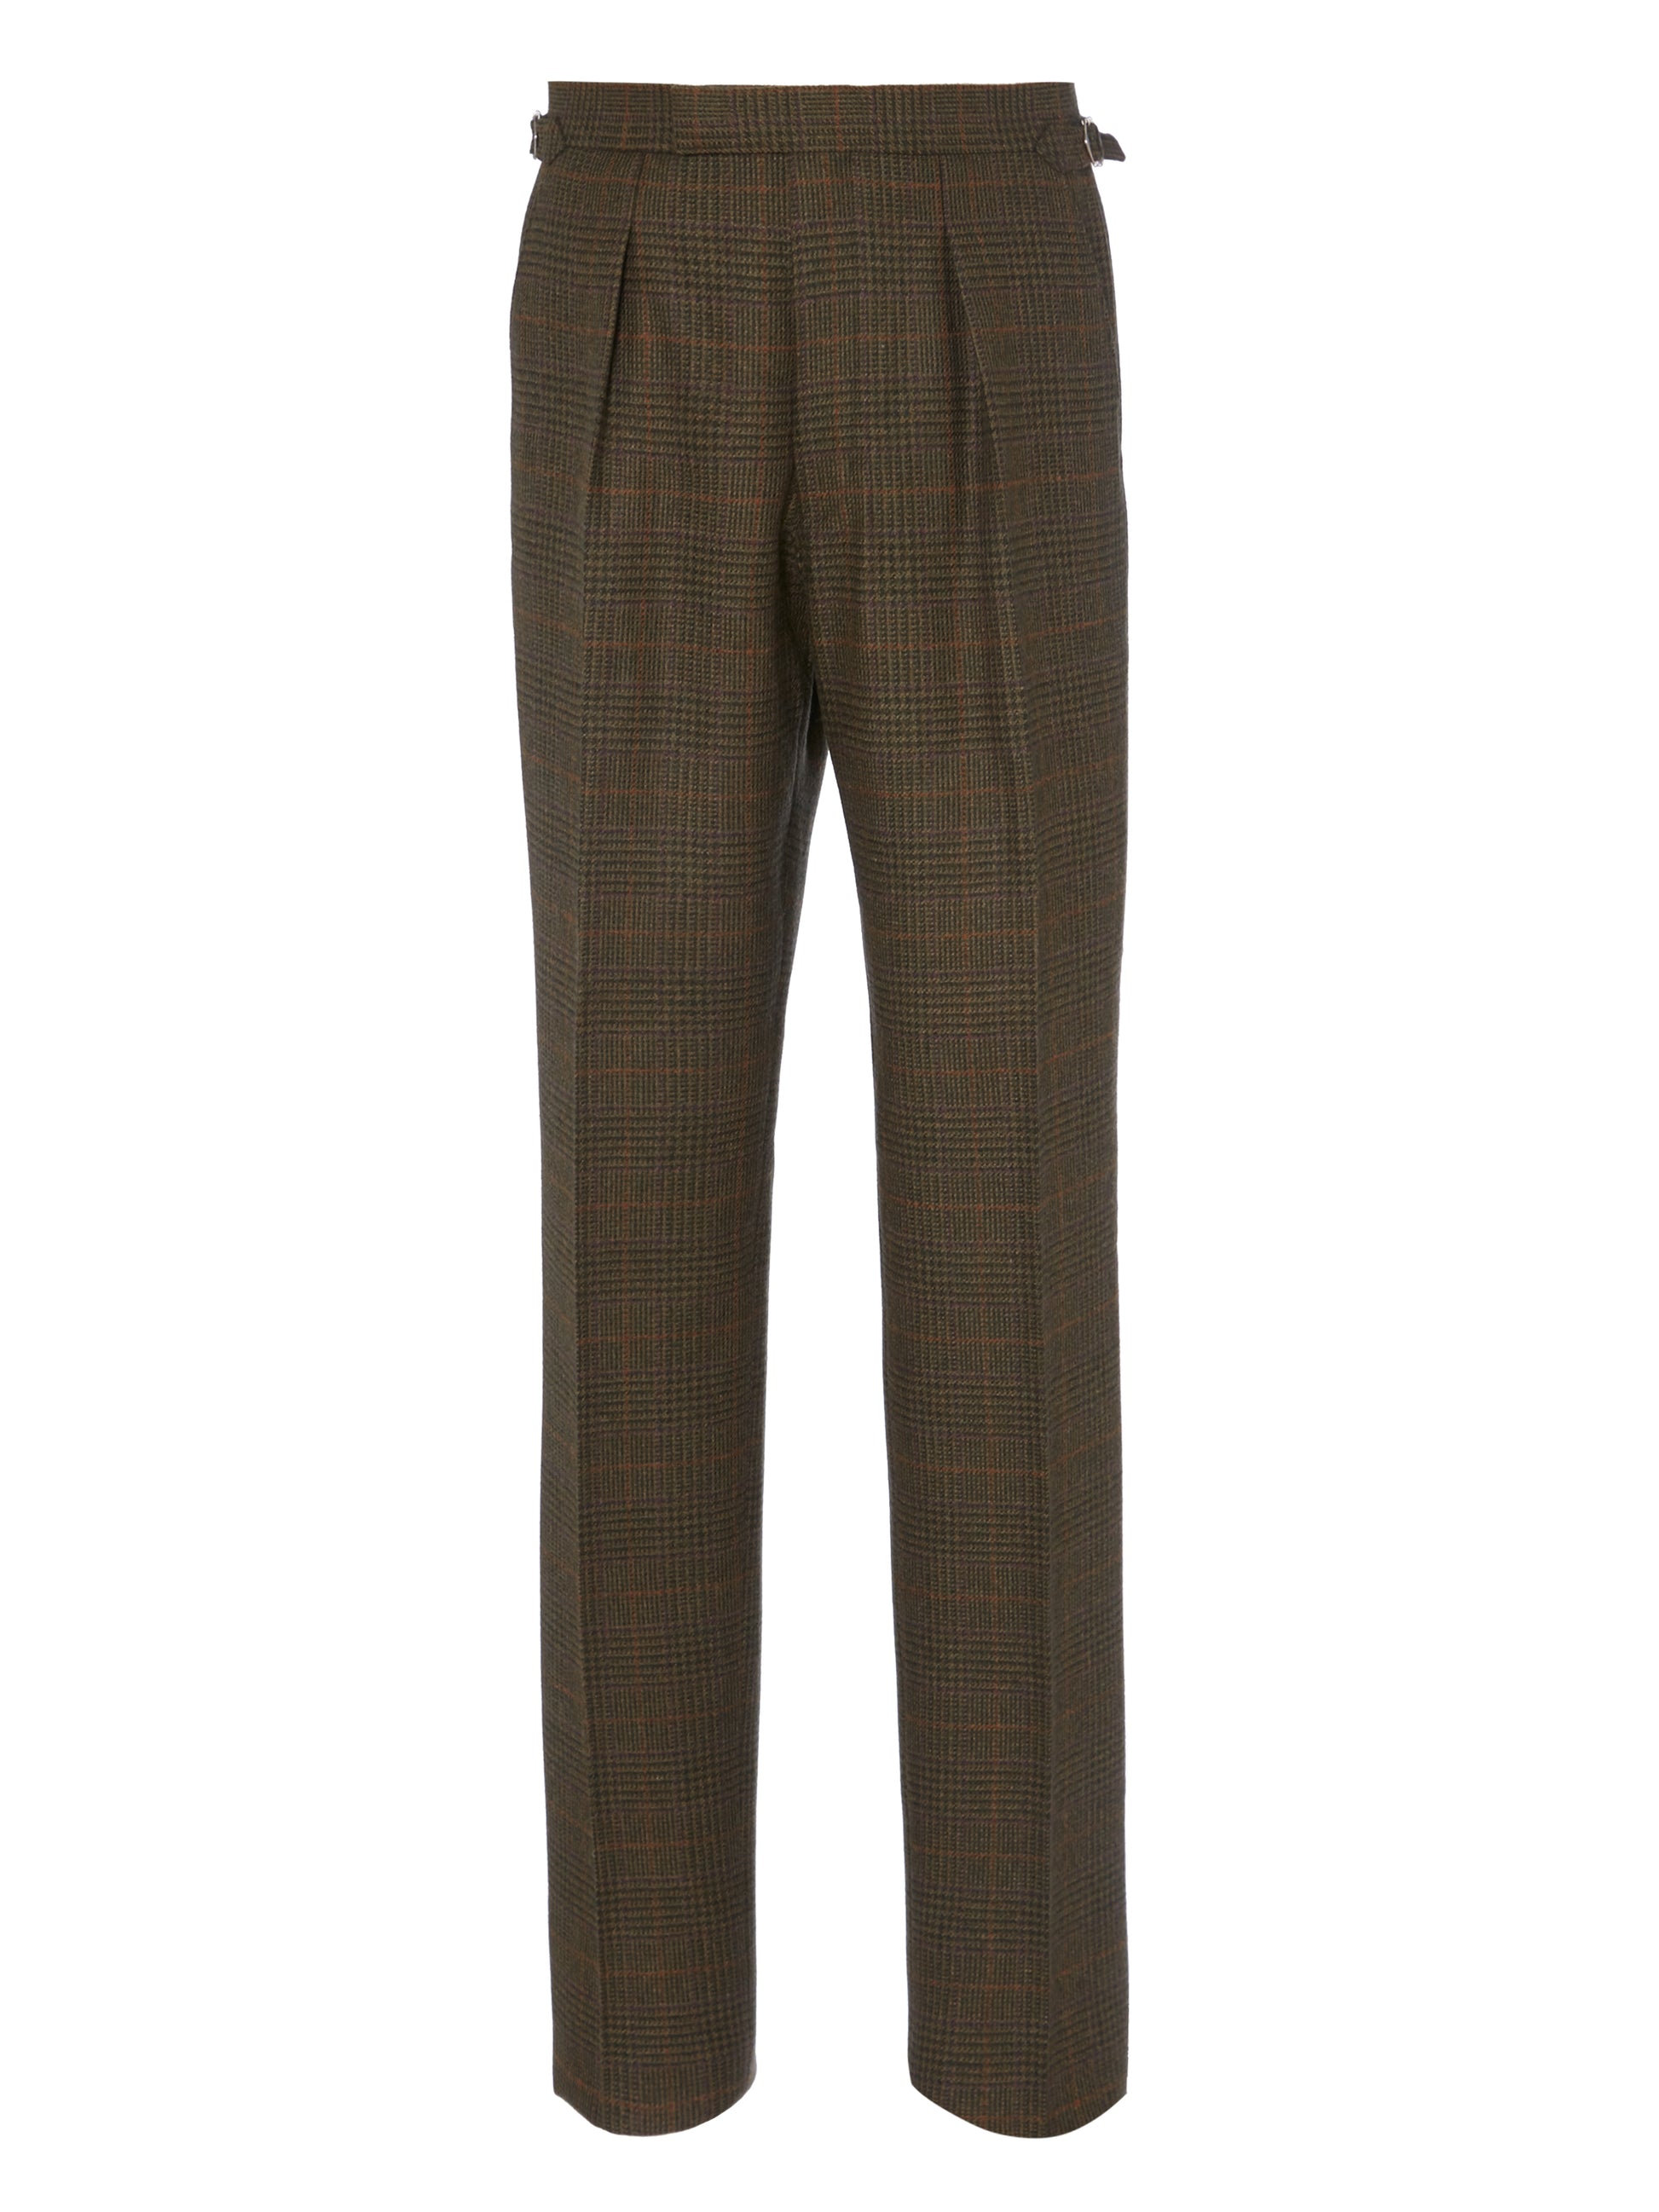 Front view of Oliver Brown pleated trouser in a limited edition tweed